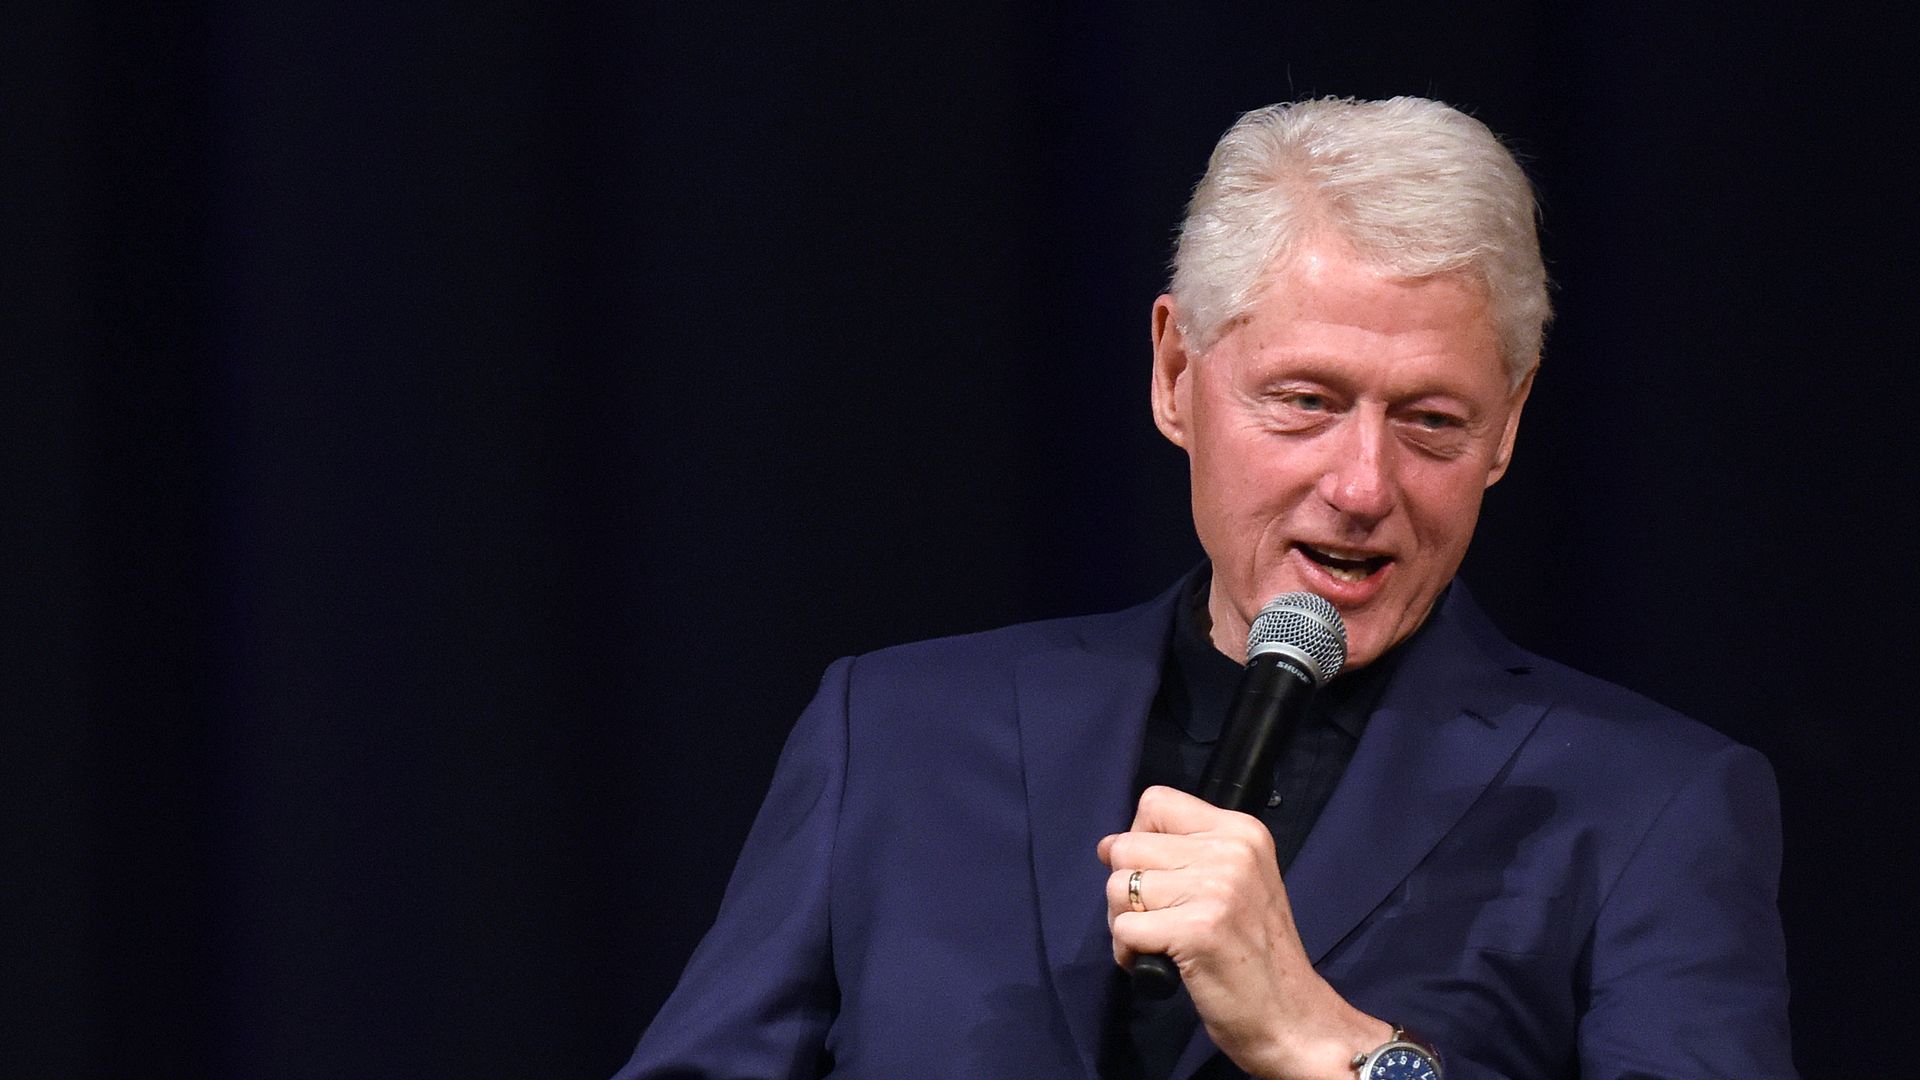 Bill Clinton speaks with a microphone.